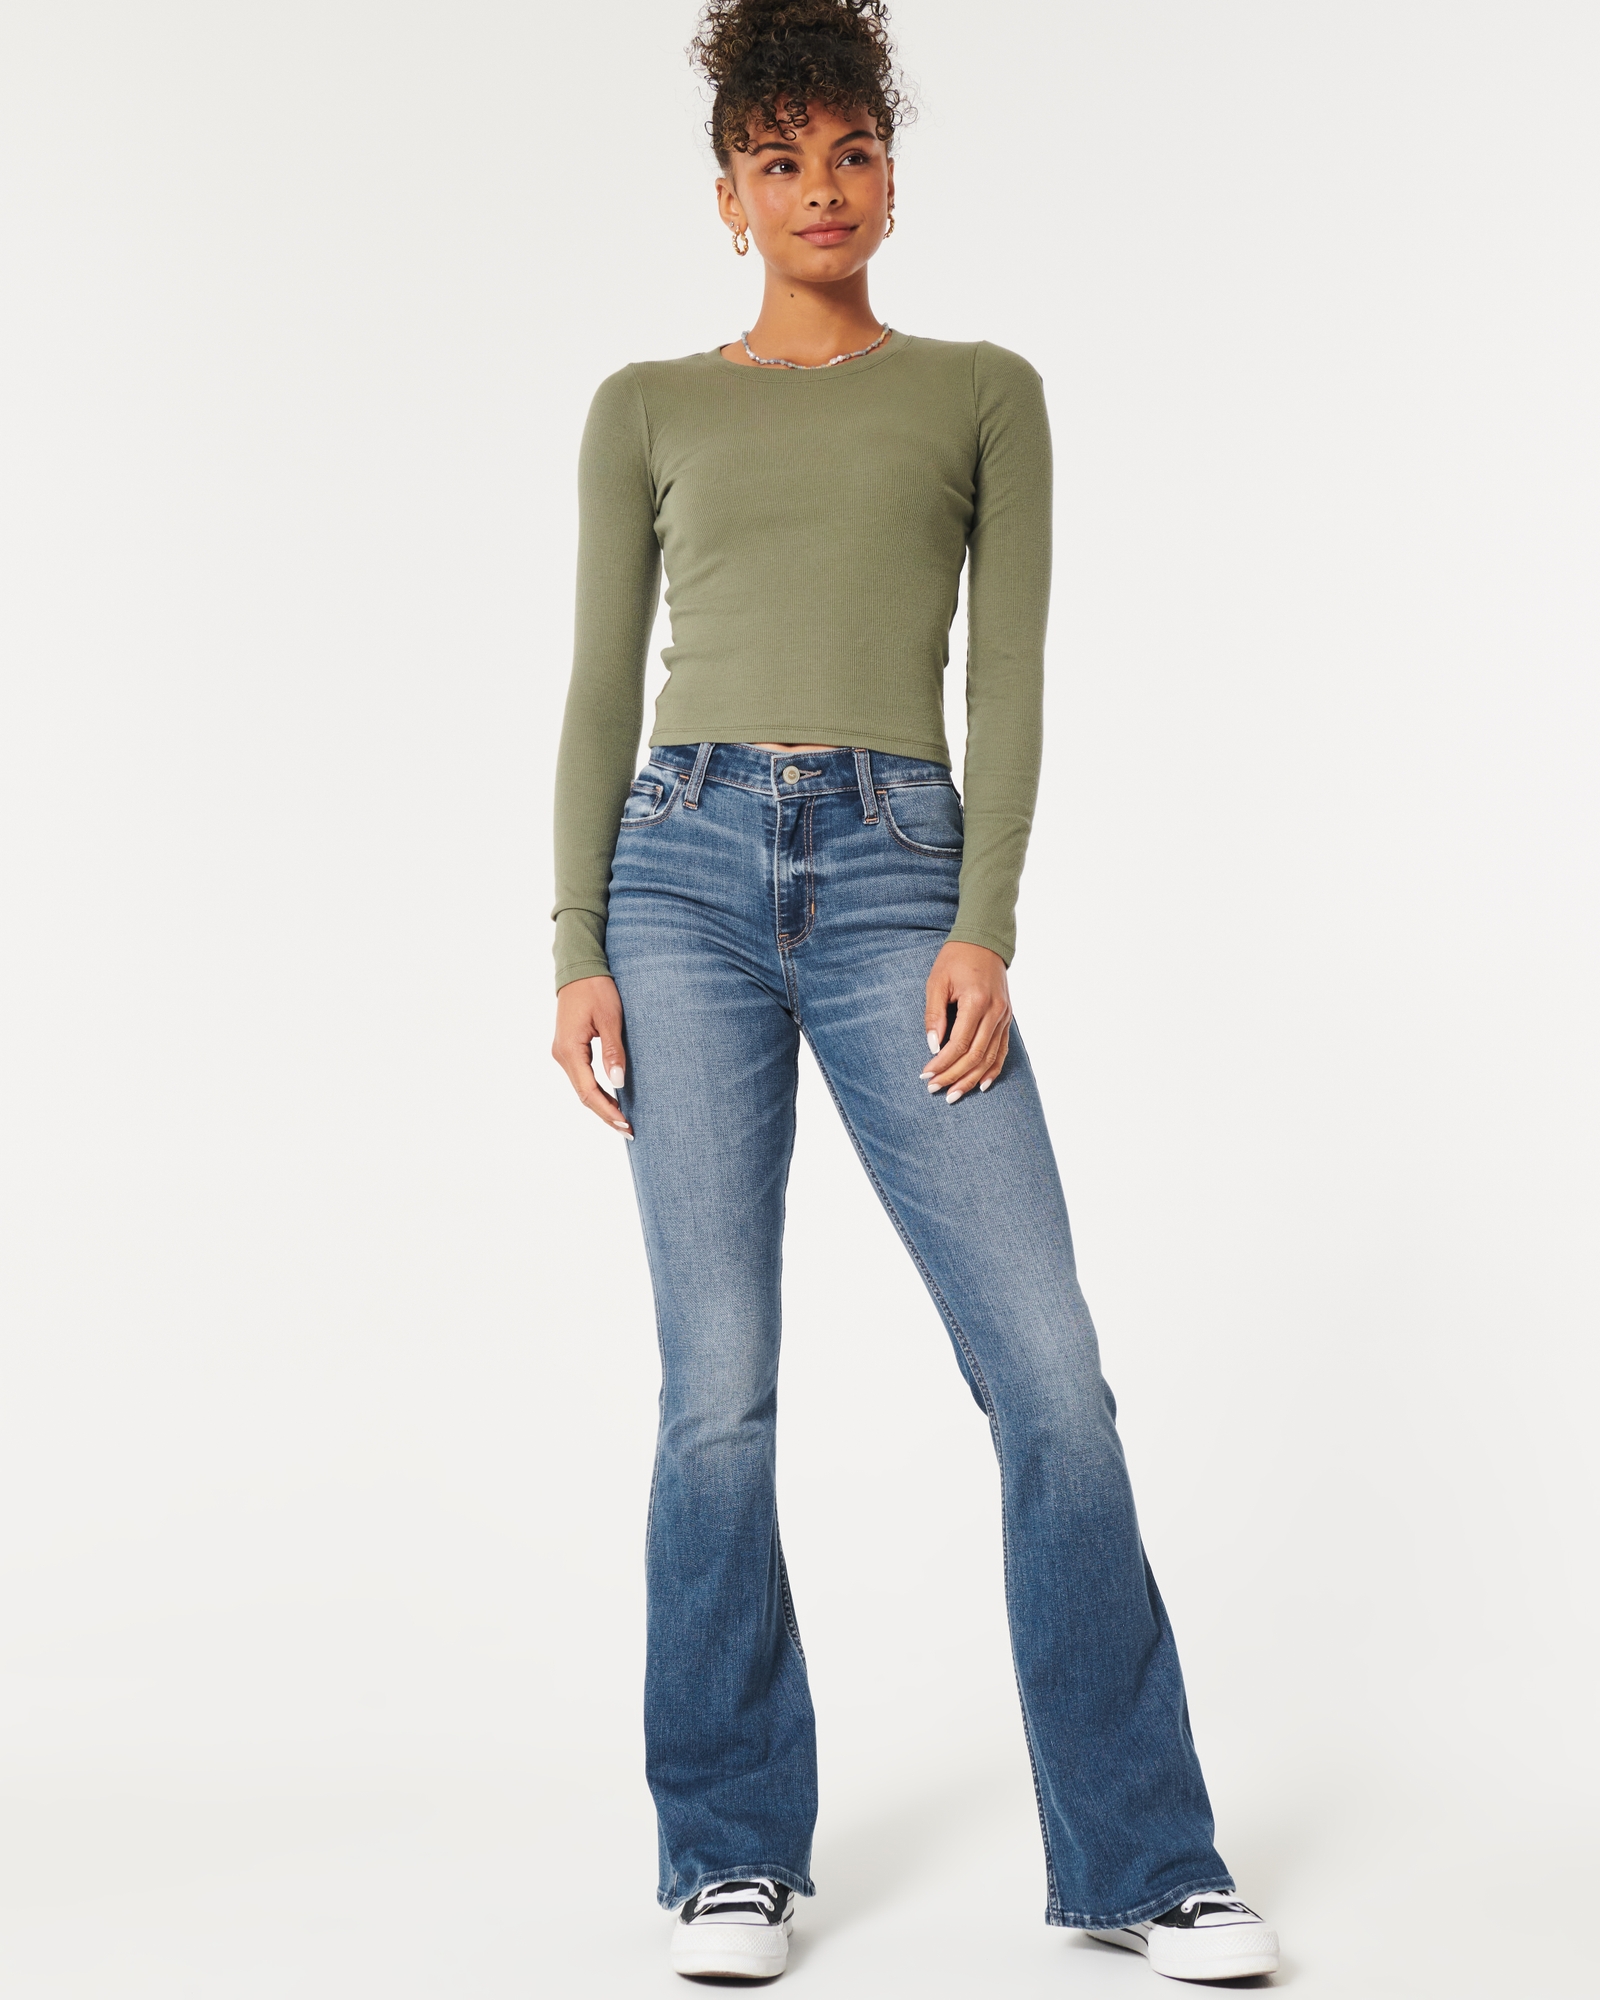 https://img.hollisterco.com/is/image/anf/KIC_355-4165-0031-278_model1.jpg?policy=product-extra-large